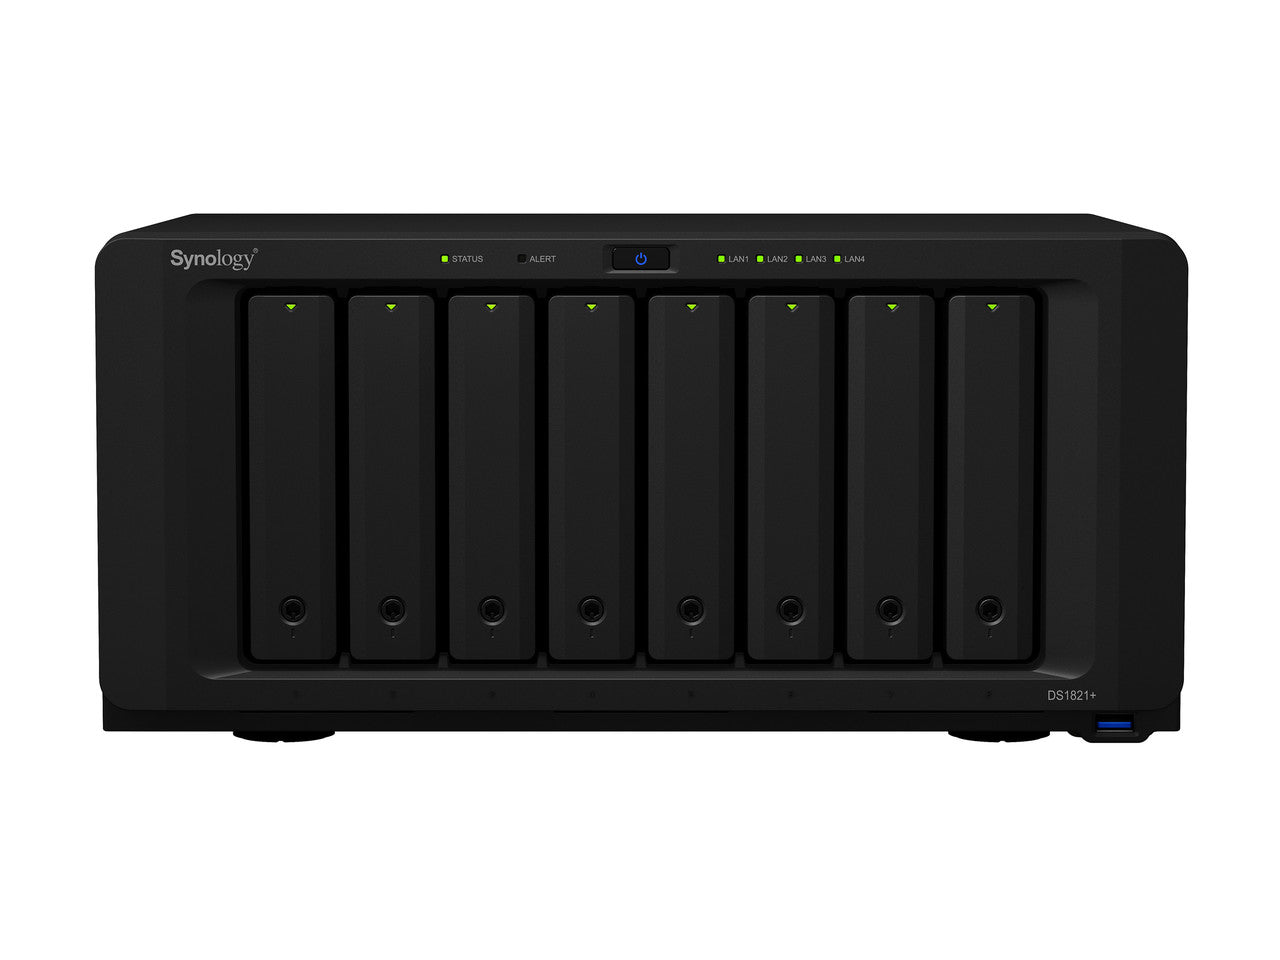 Synology DS1821+ 8-BAY DiskStation with 4GB Synology RAM and 128TB (8x16TB) Synology Enterprise HAT5300 Drives Fully Assembled and Tested